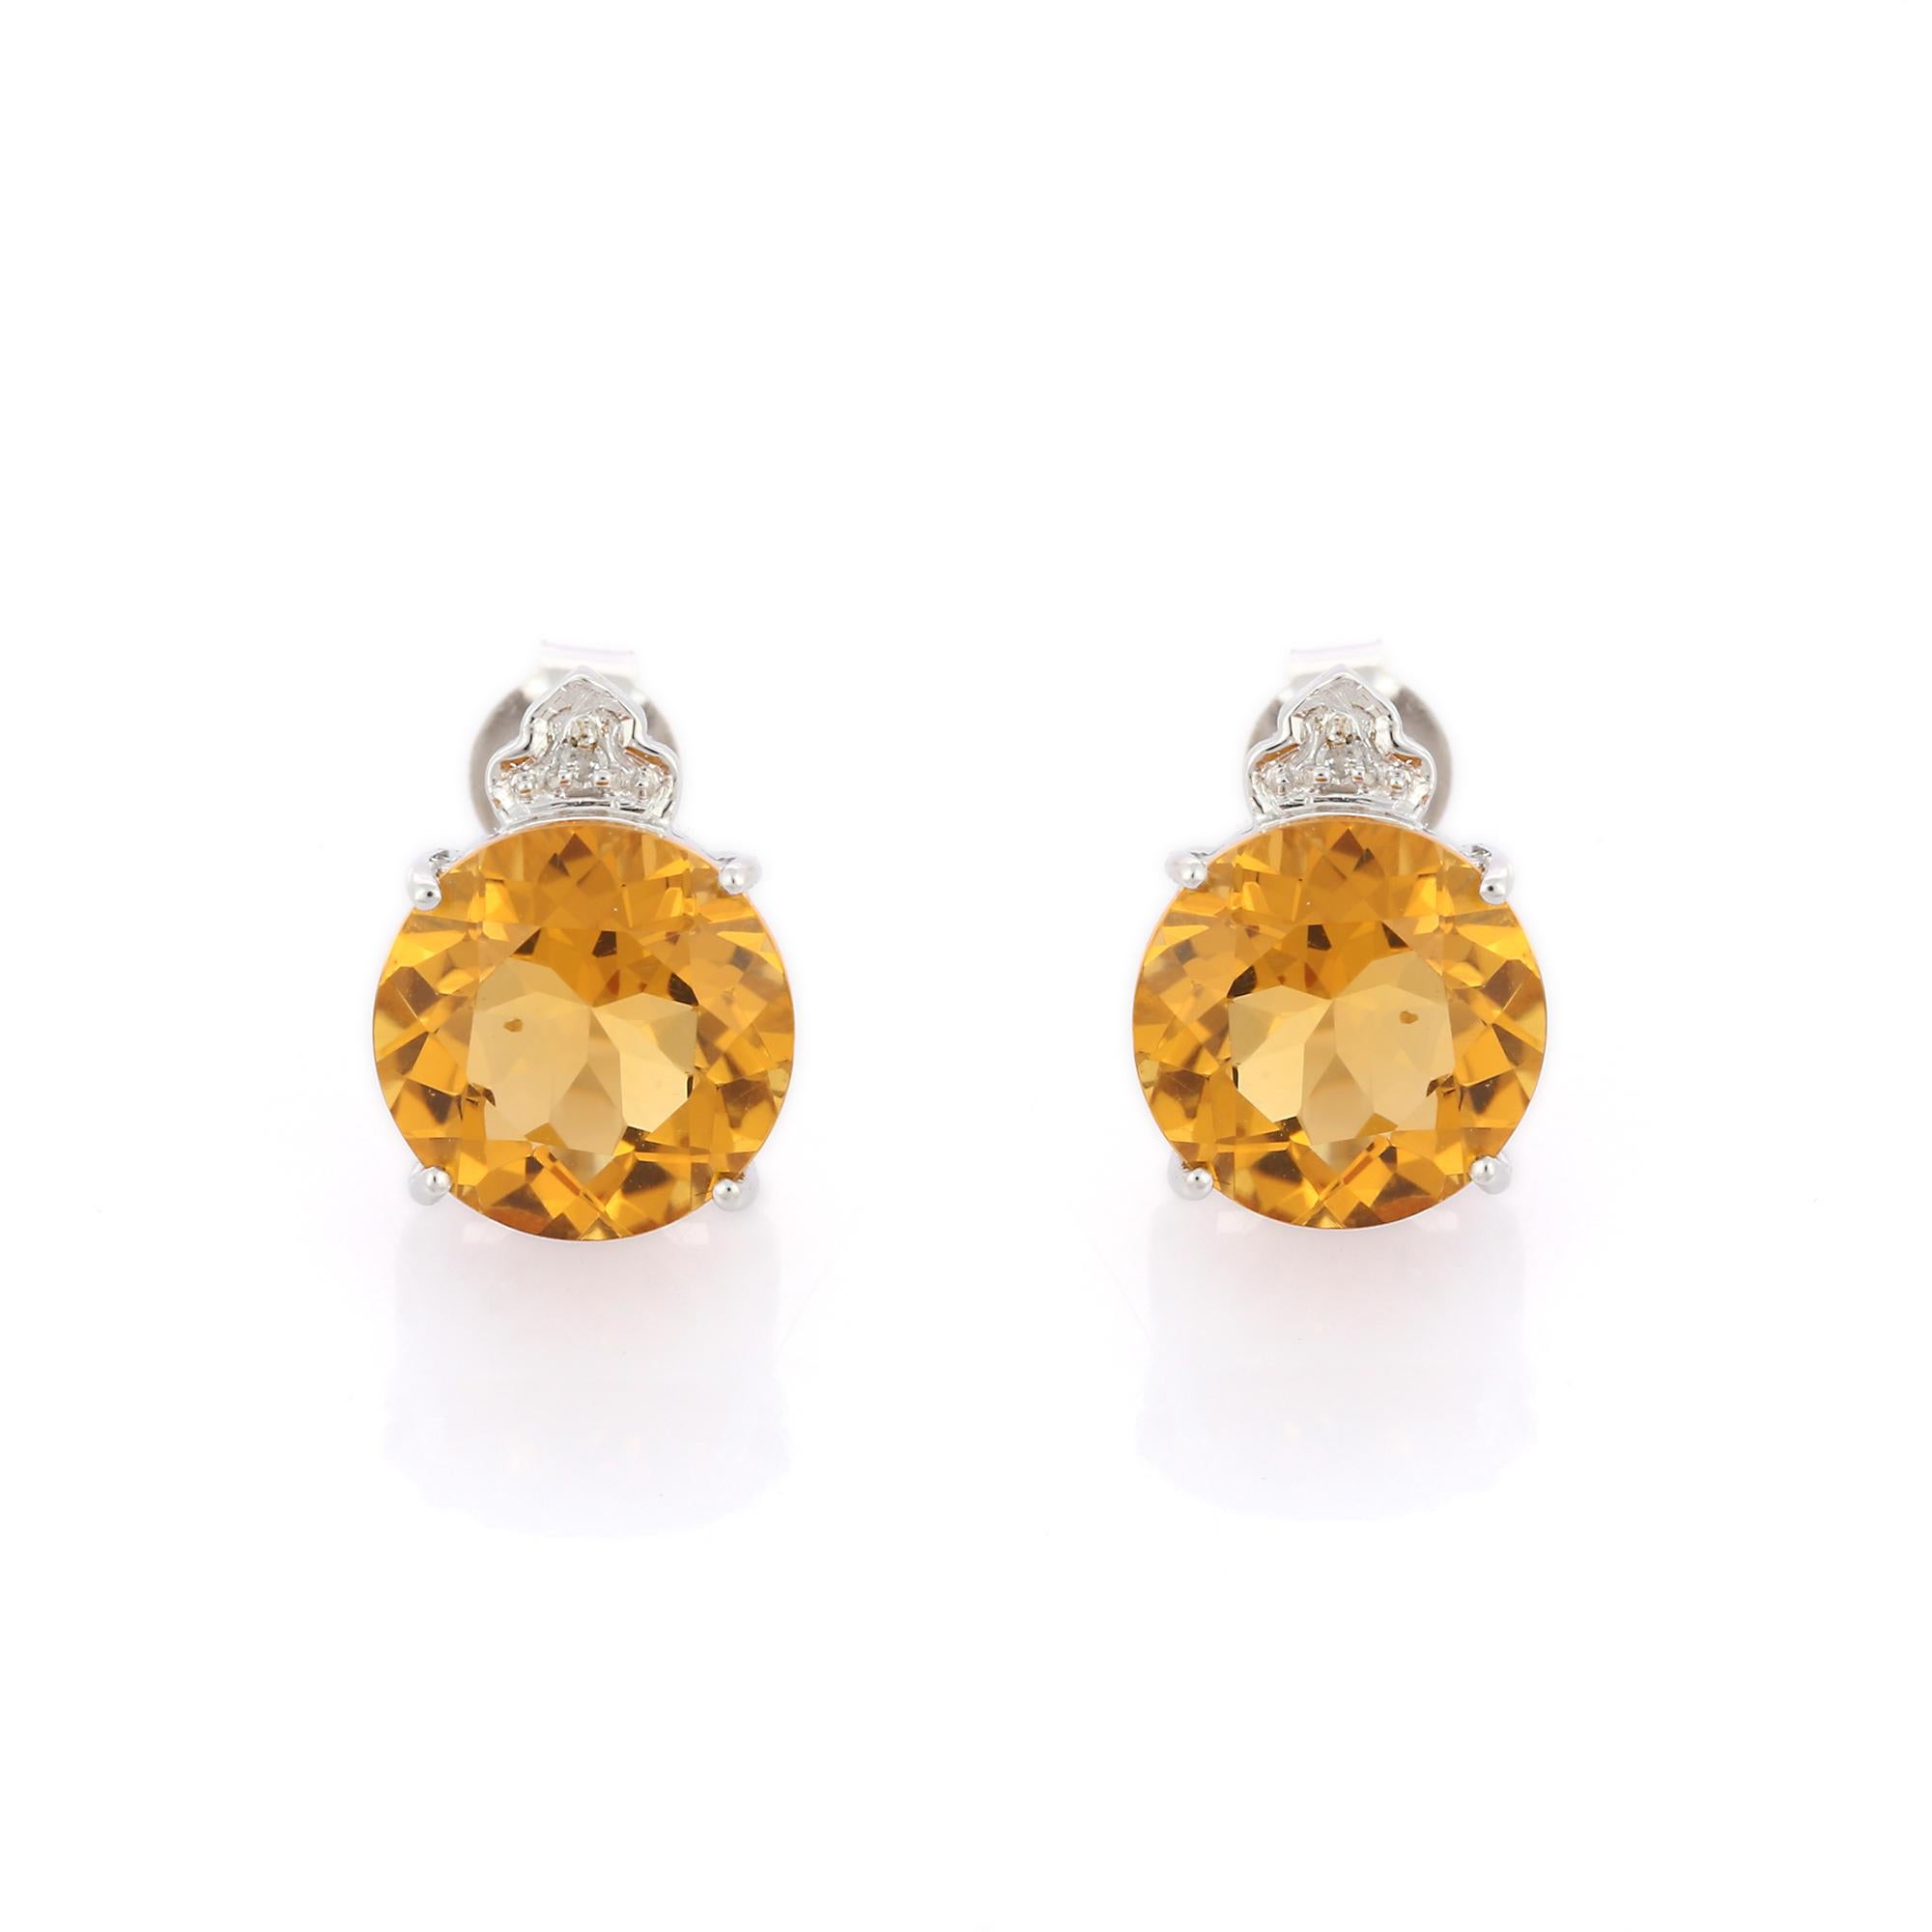 Round Cut Diamond Crowned Citrine Gemstone Stud Earrings in 14K White Gold For Sale